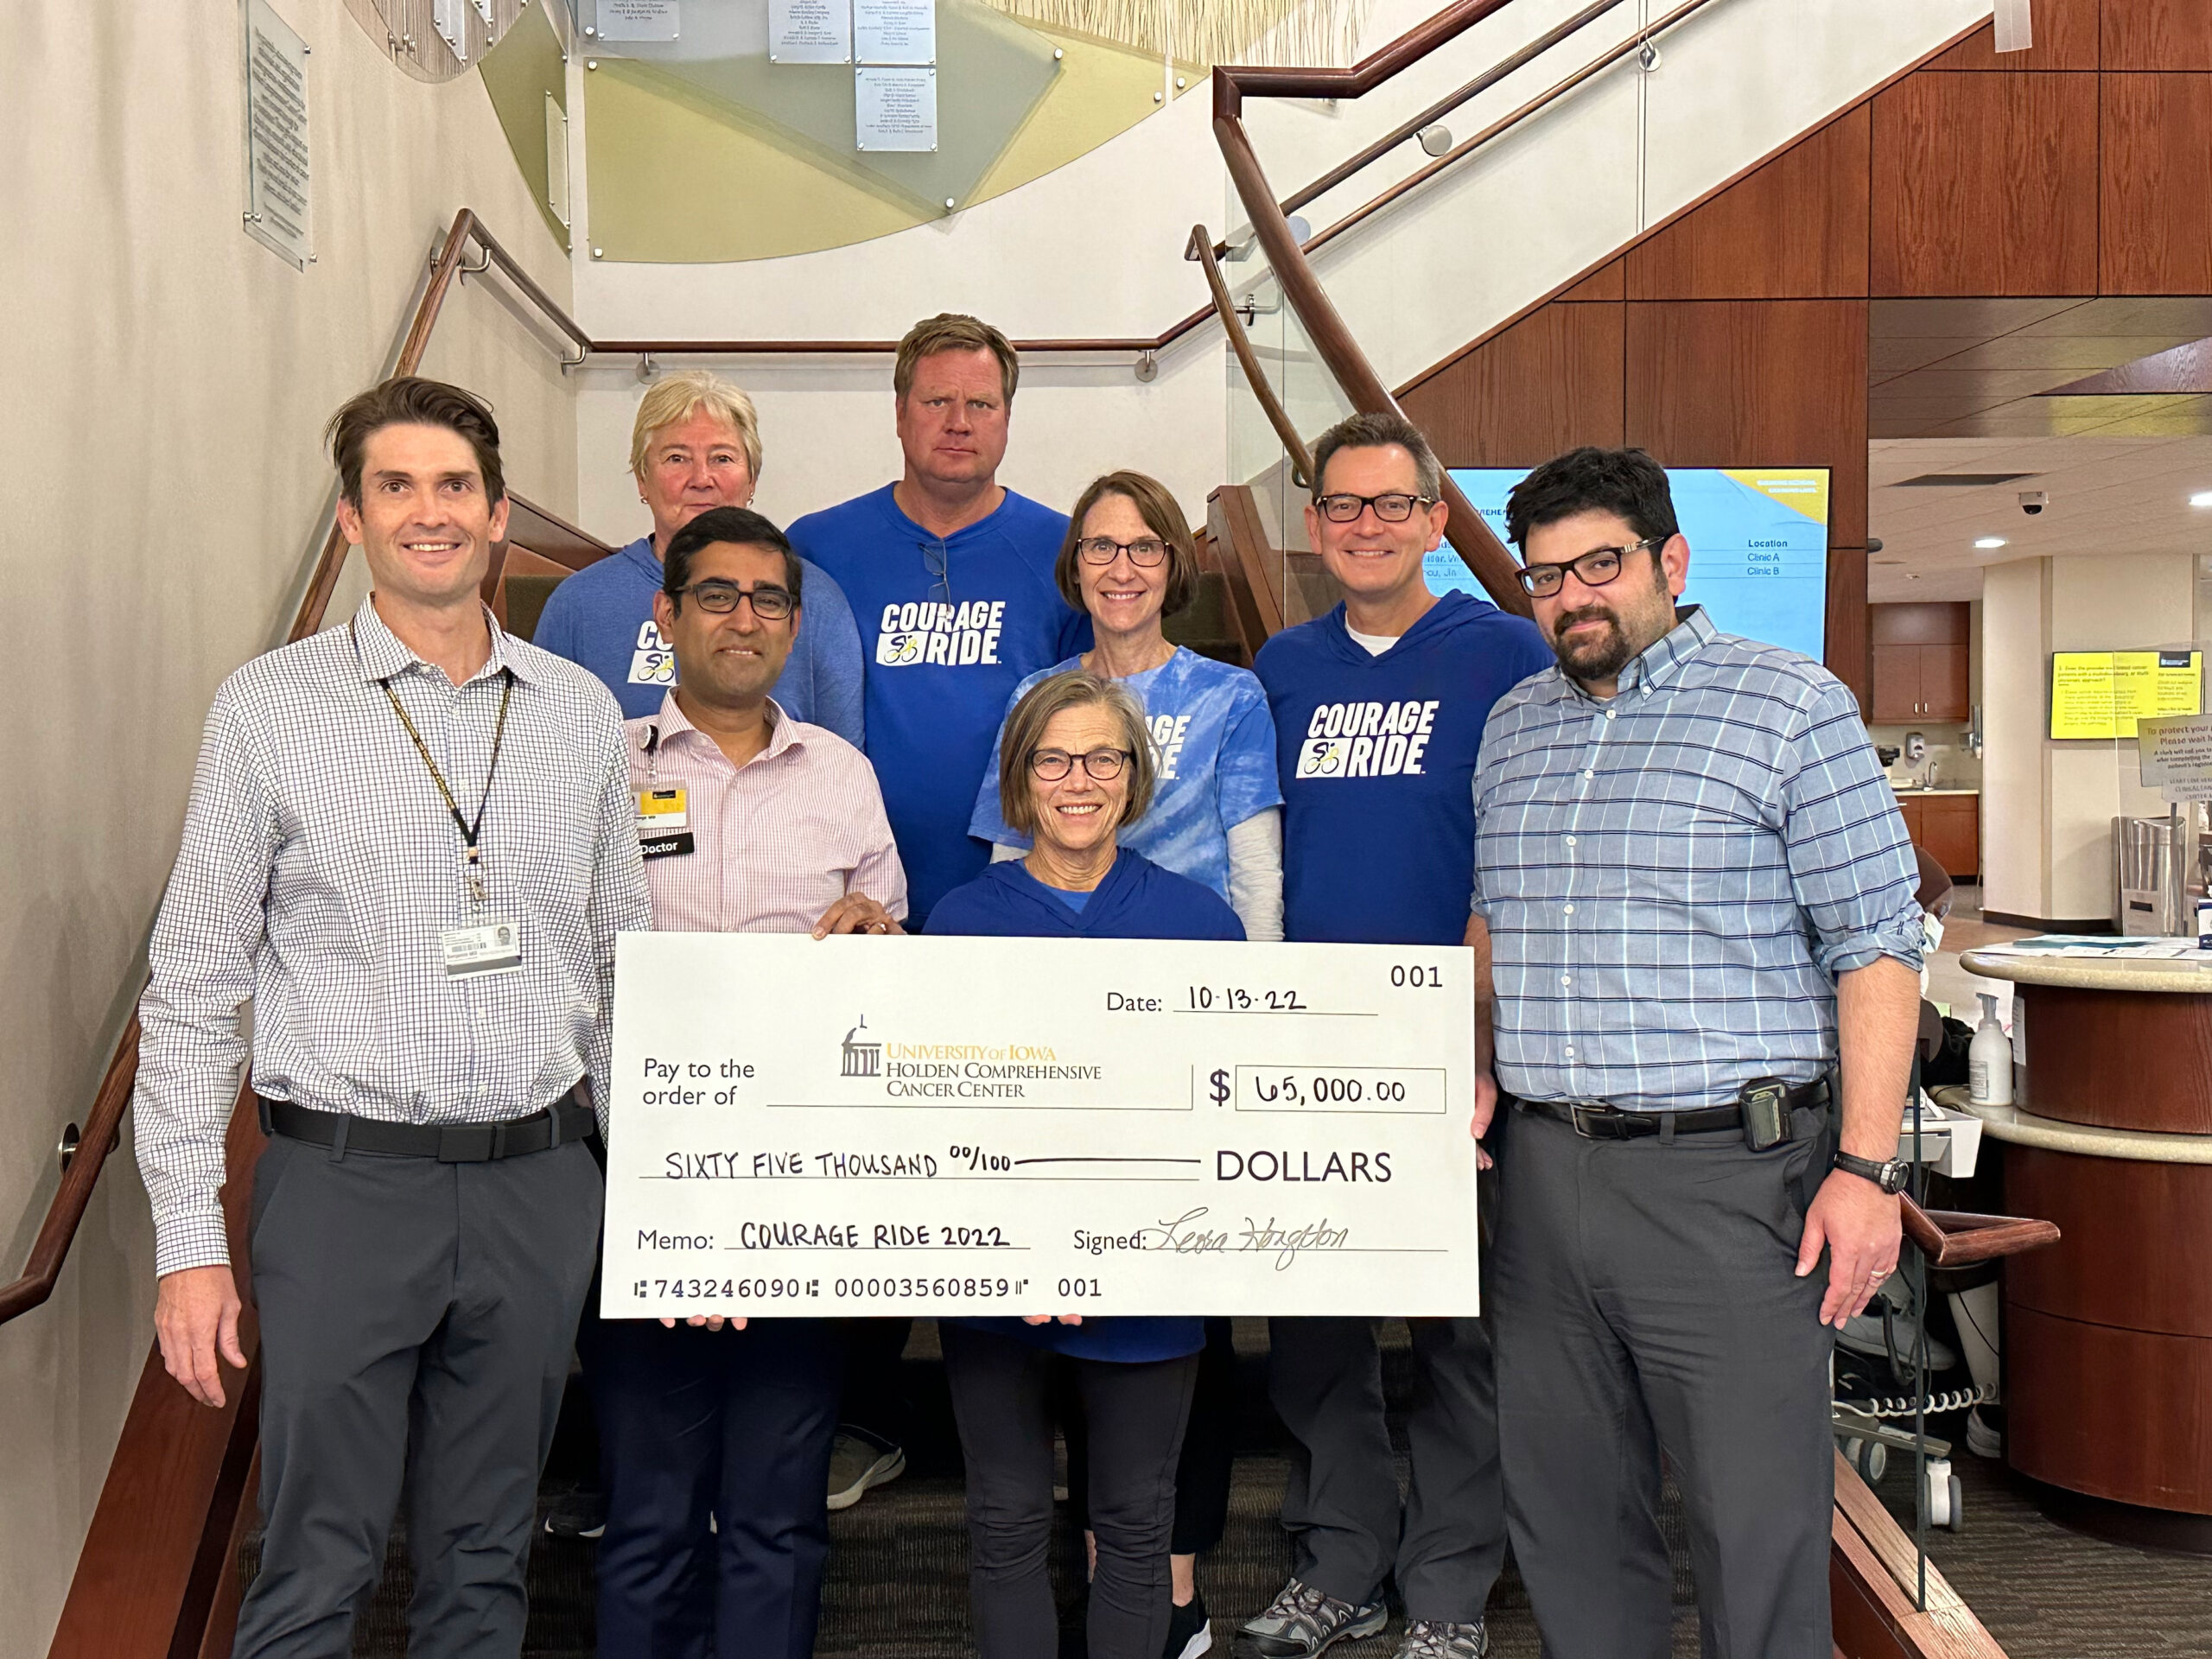 Courage Ride board members present a check for $65,000 to the Holden Comprehensive Cancer Center Sarcoma Research Program at the University of Iowa Hospitals and Clinics